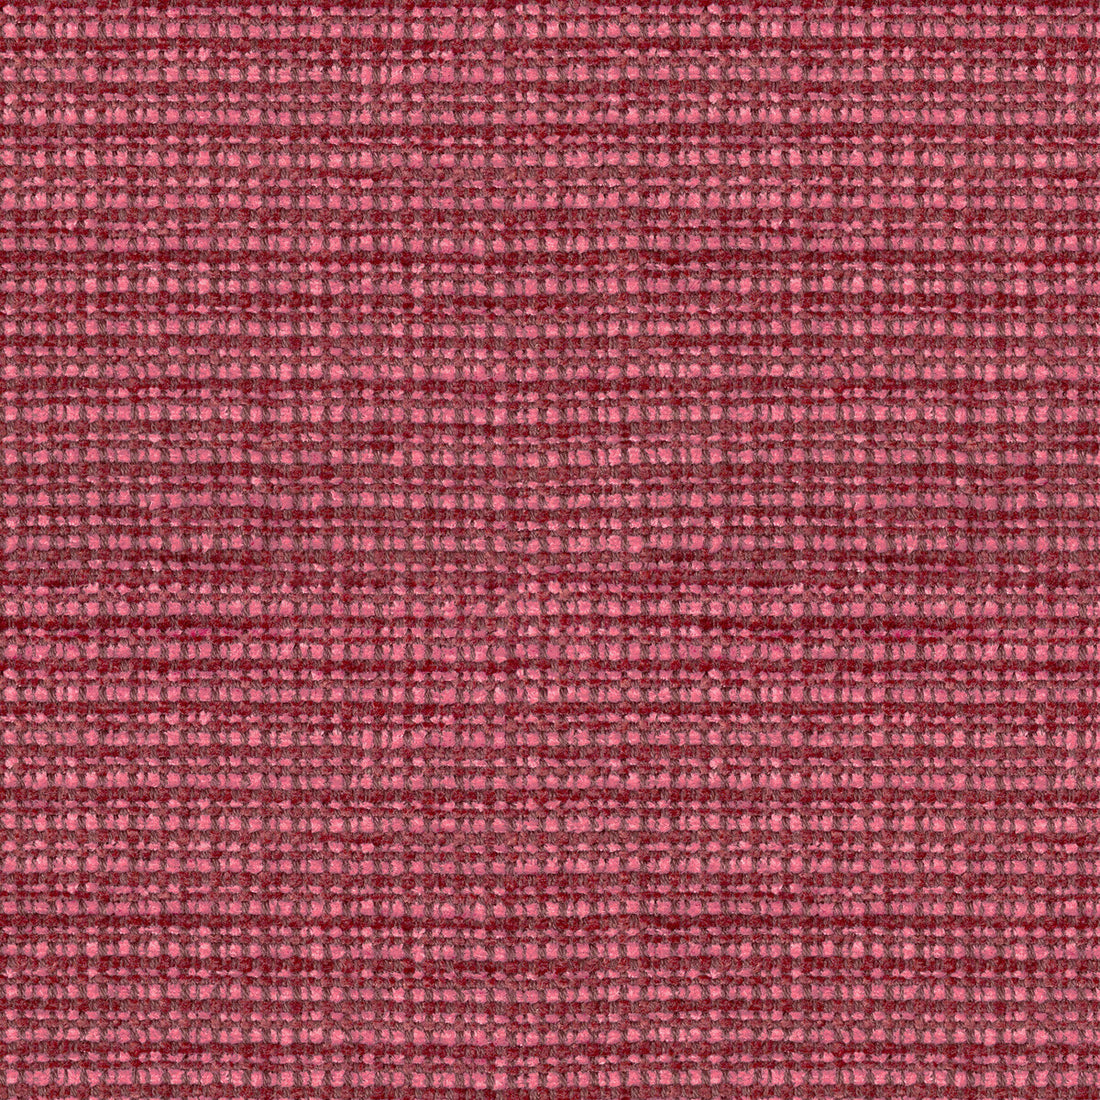 Freney Texture fabric in berry color - pattern 8019149.97.0 - by Brunschwig &amp; Fils in the Chambery Textures II collection